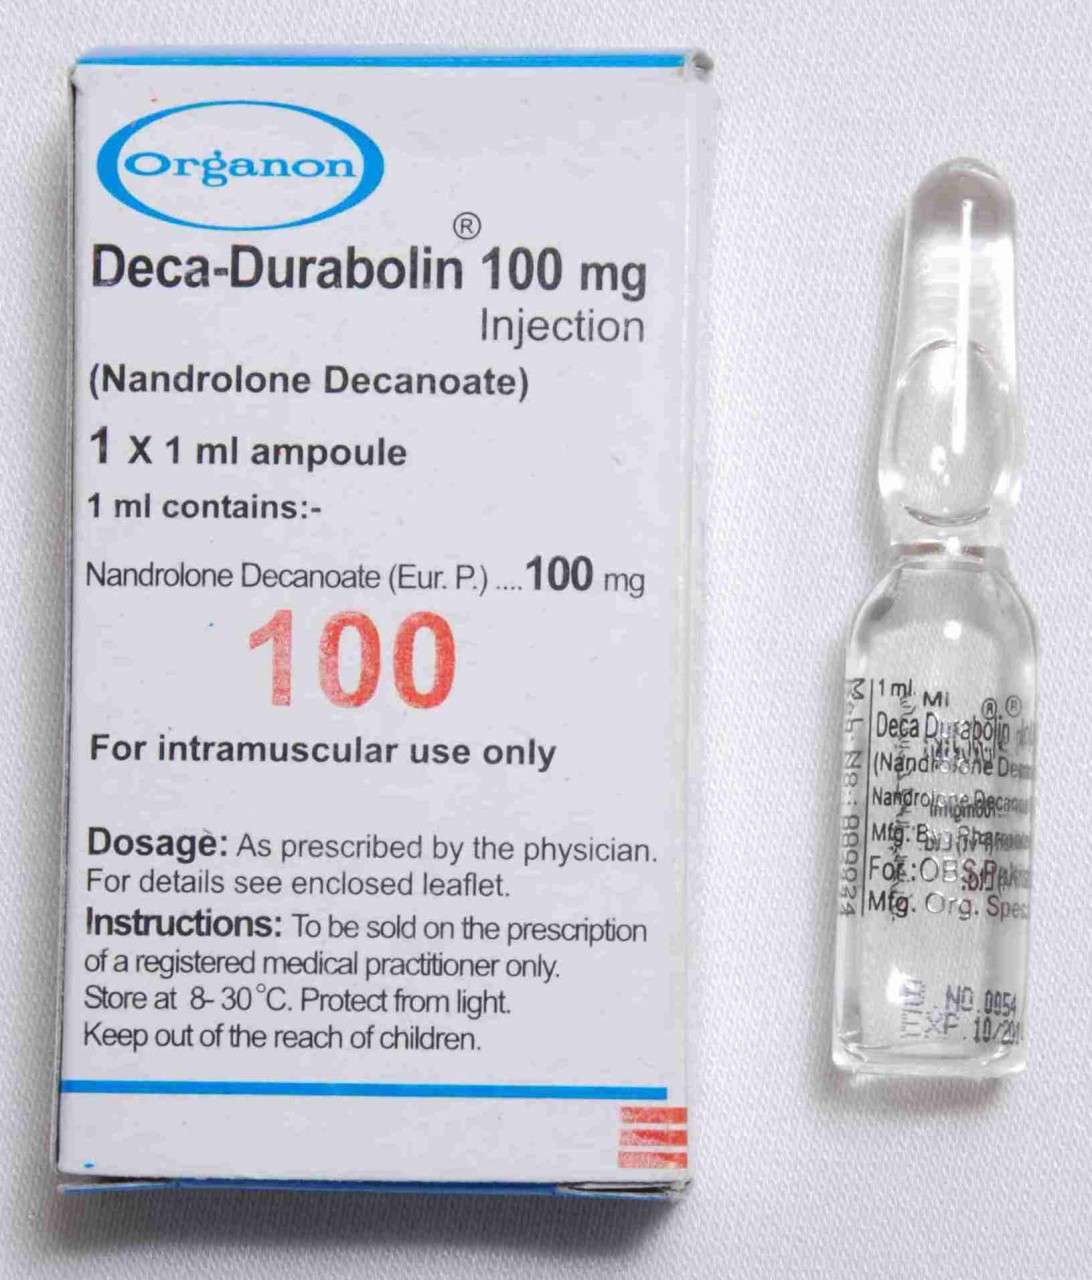 Deca Durabolin injections